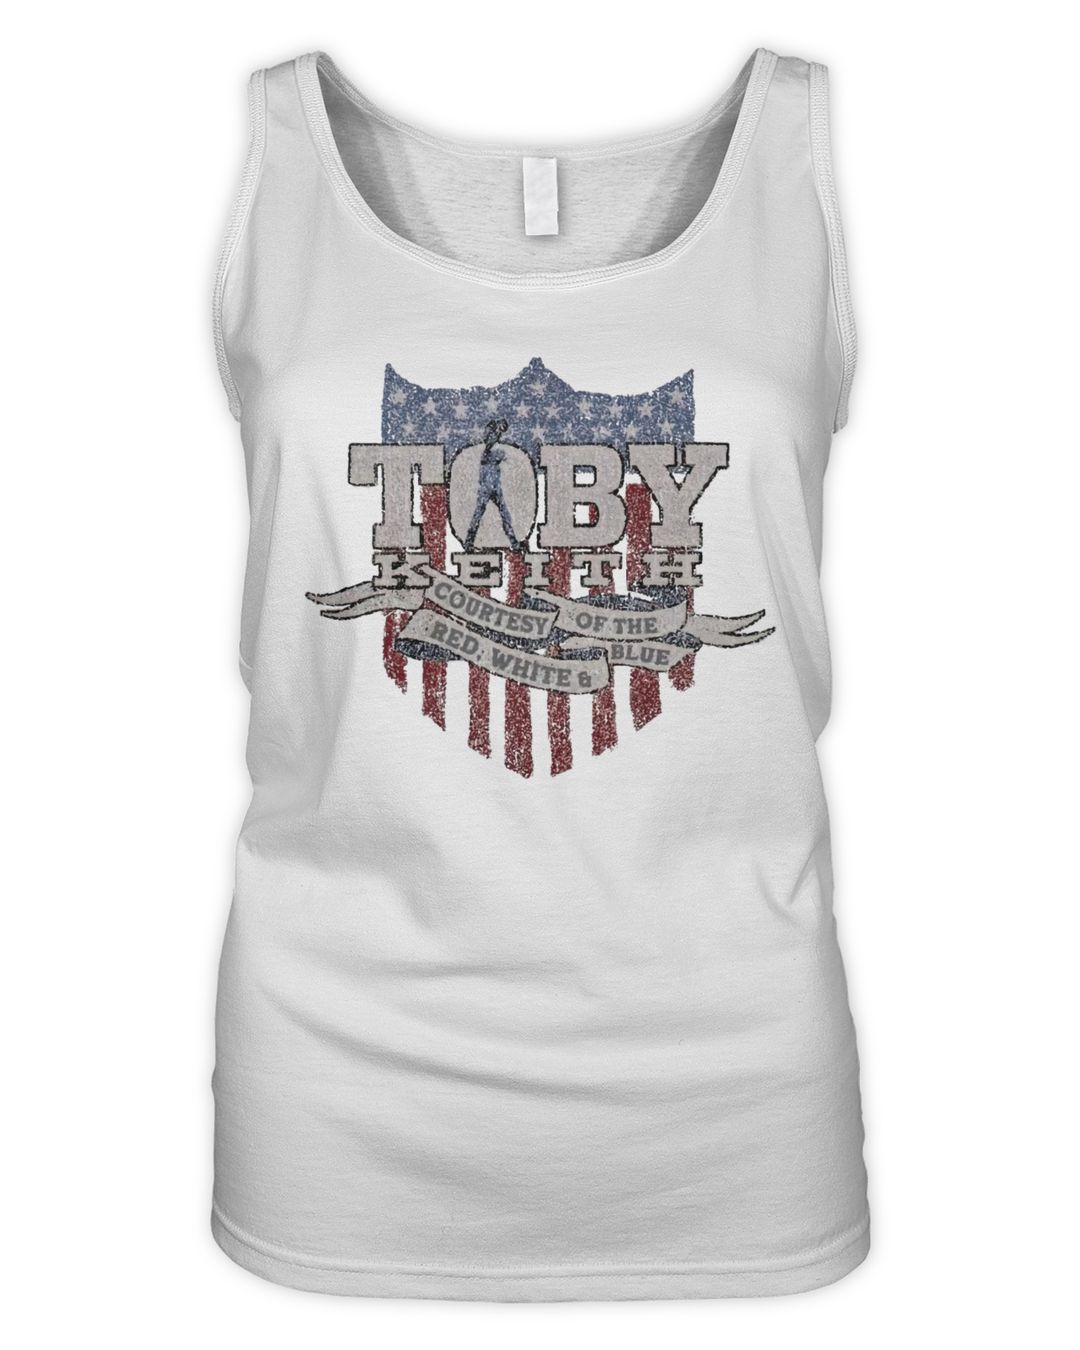 Toby Keith Merch Courtesy Of The Red White & Blue Shirt